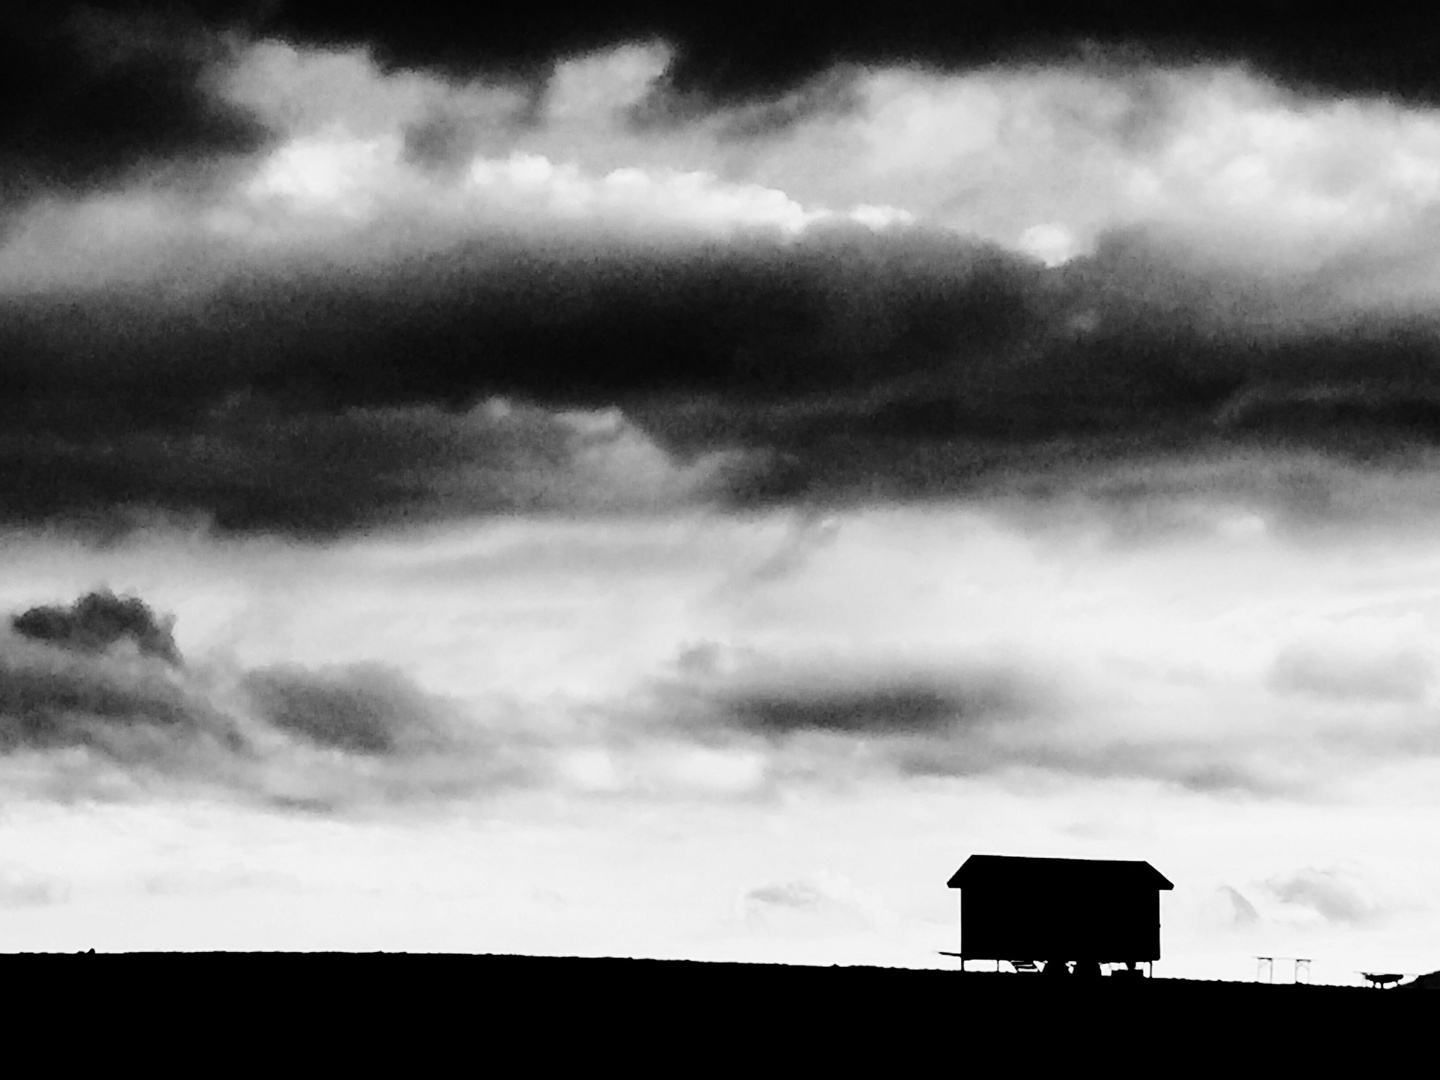 Trailer on a hill